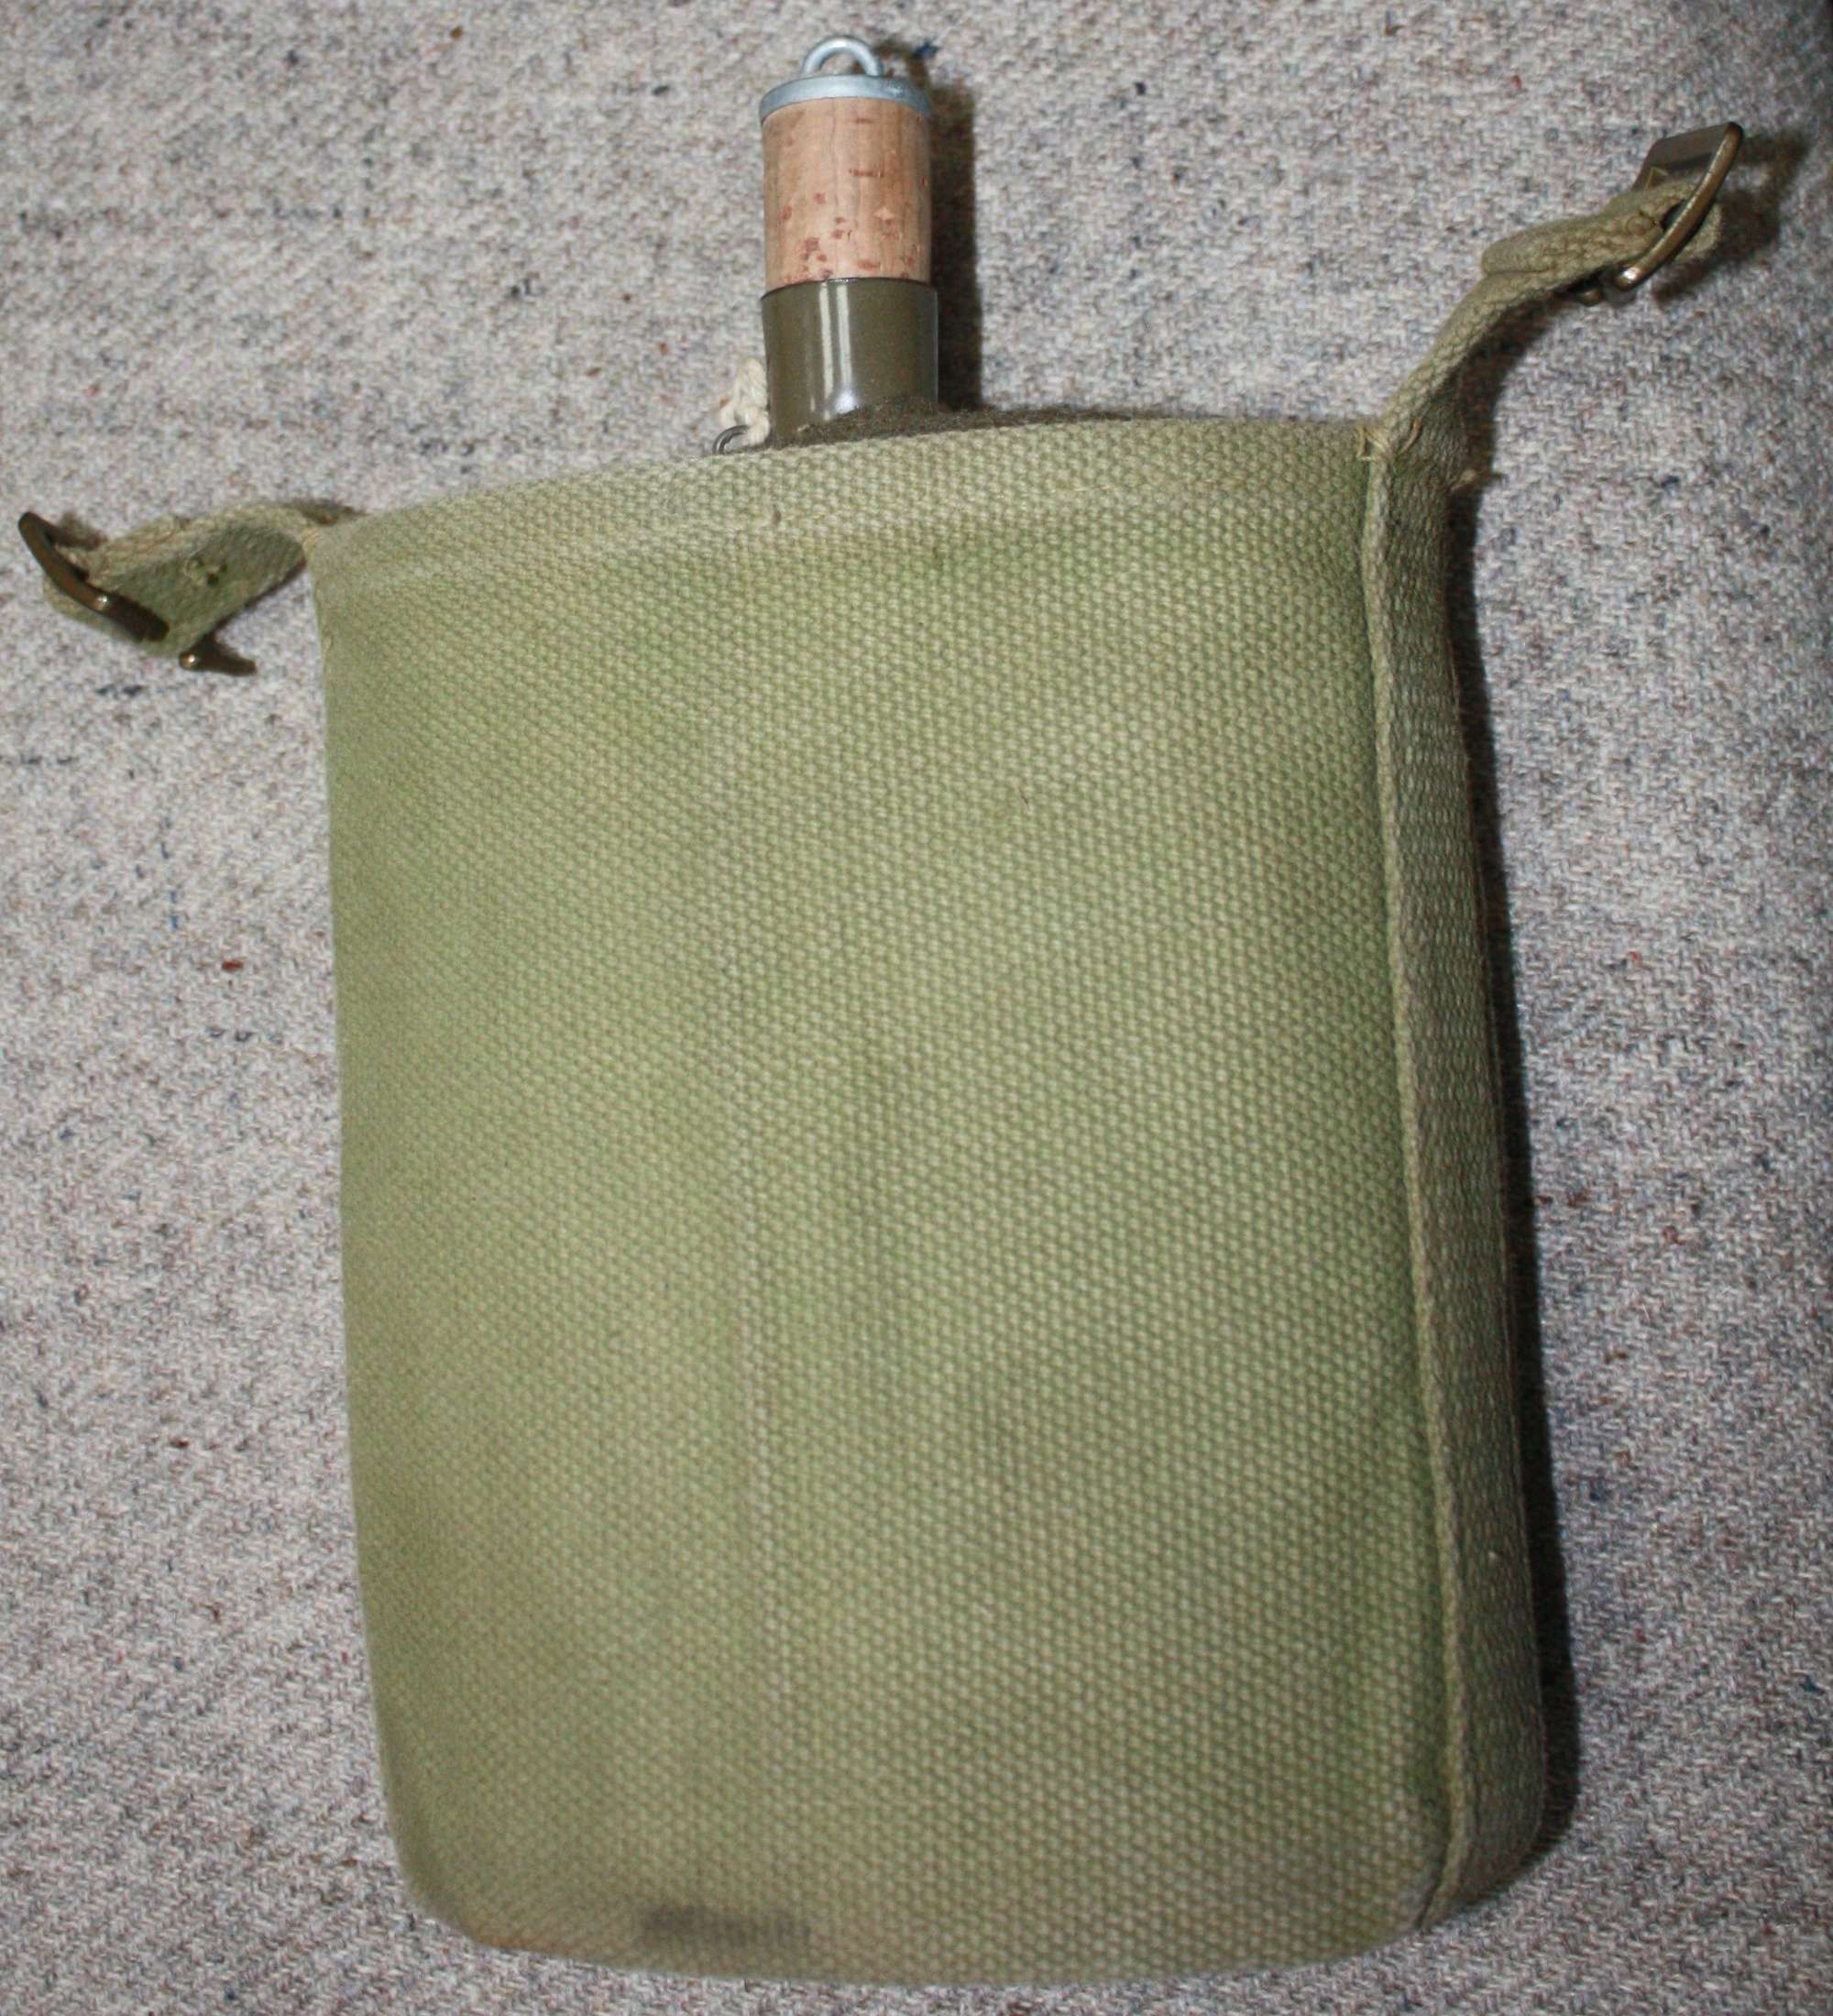 A WWII 37 PATTERN WATER BOTTLE AND CRADLE